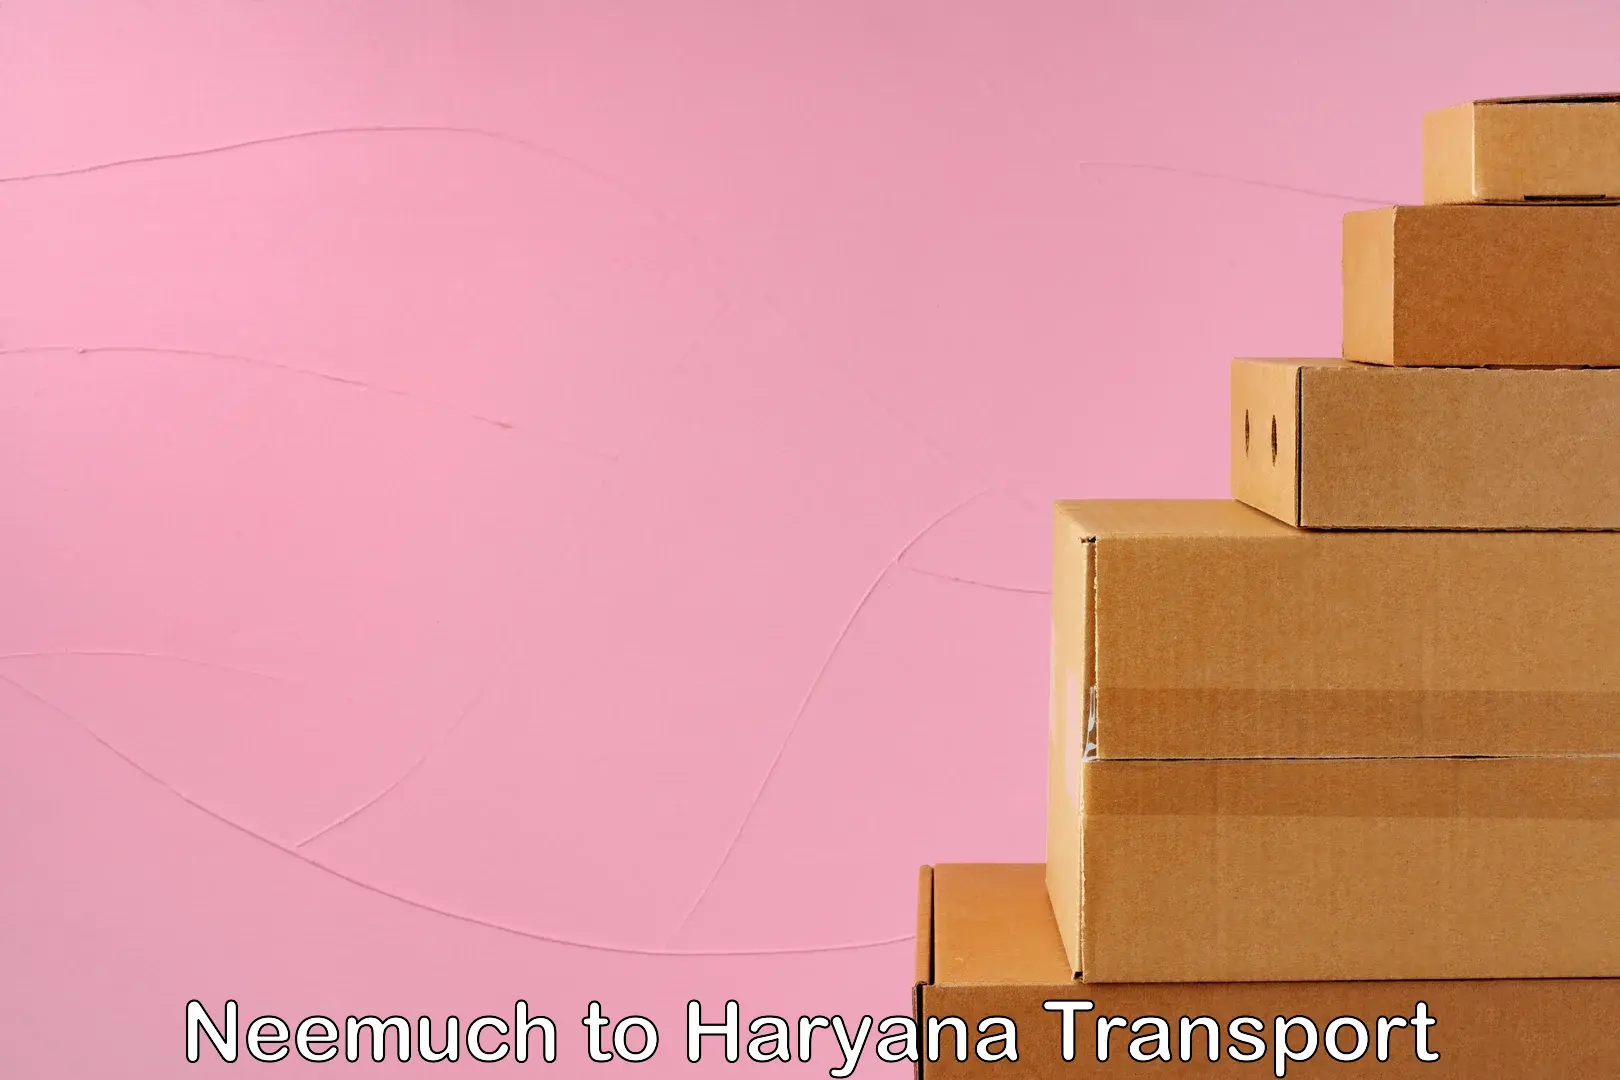 Container transport service Neemuch to Haryana